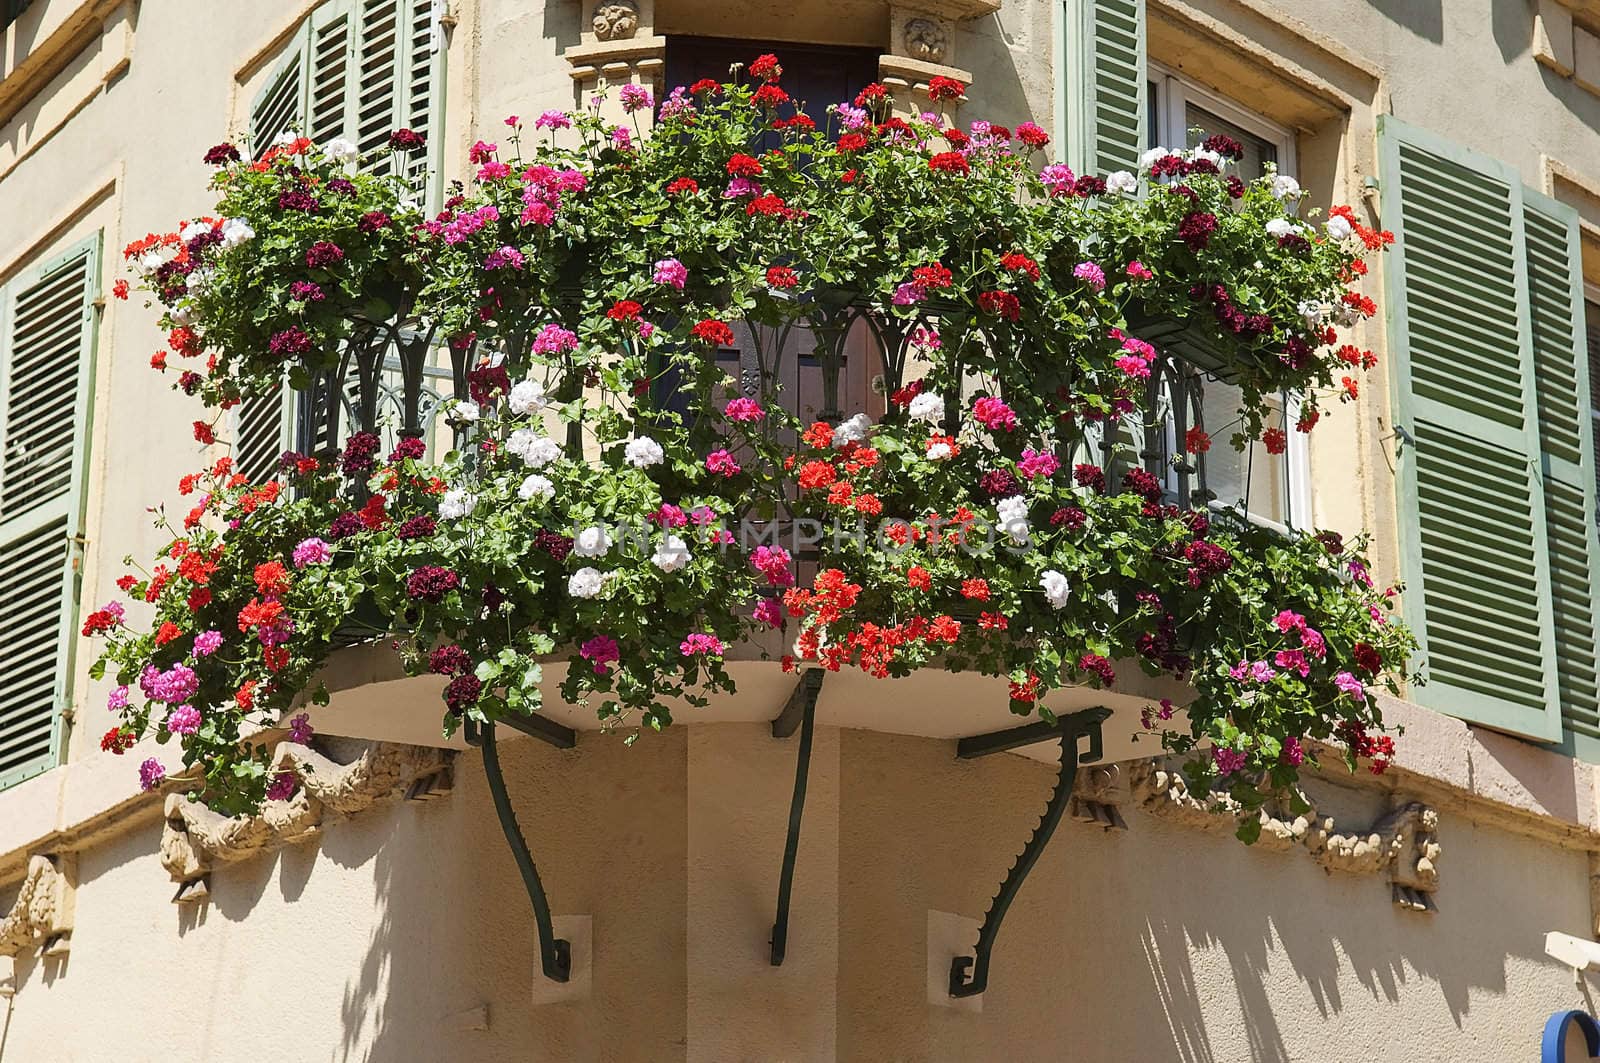 Flowers in the city of Colmar France